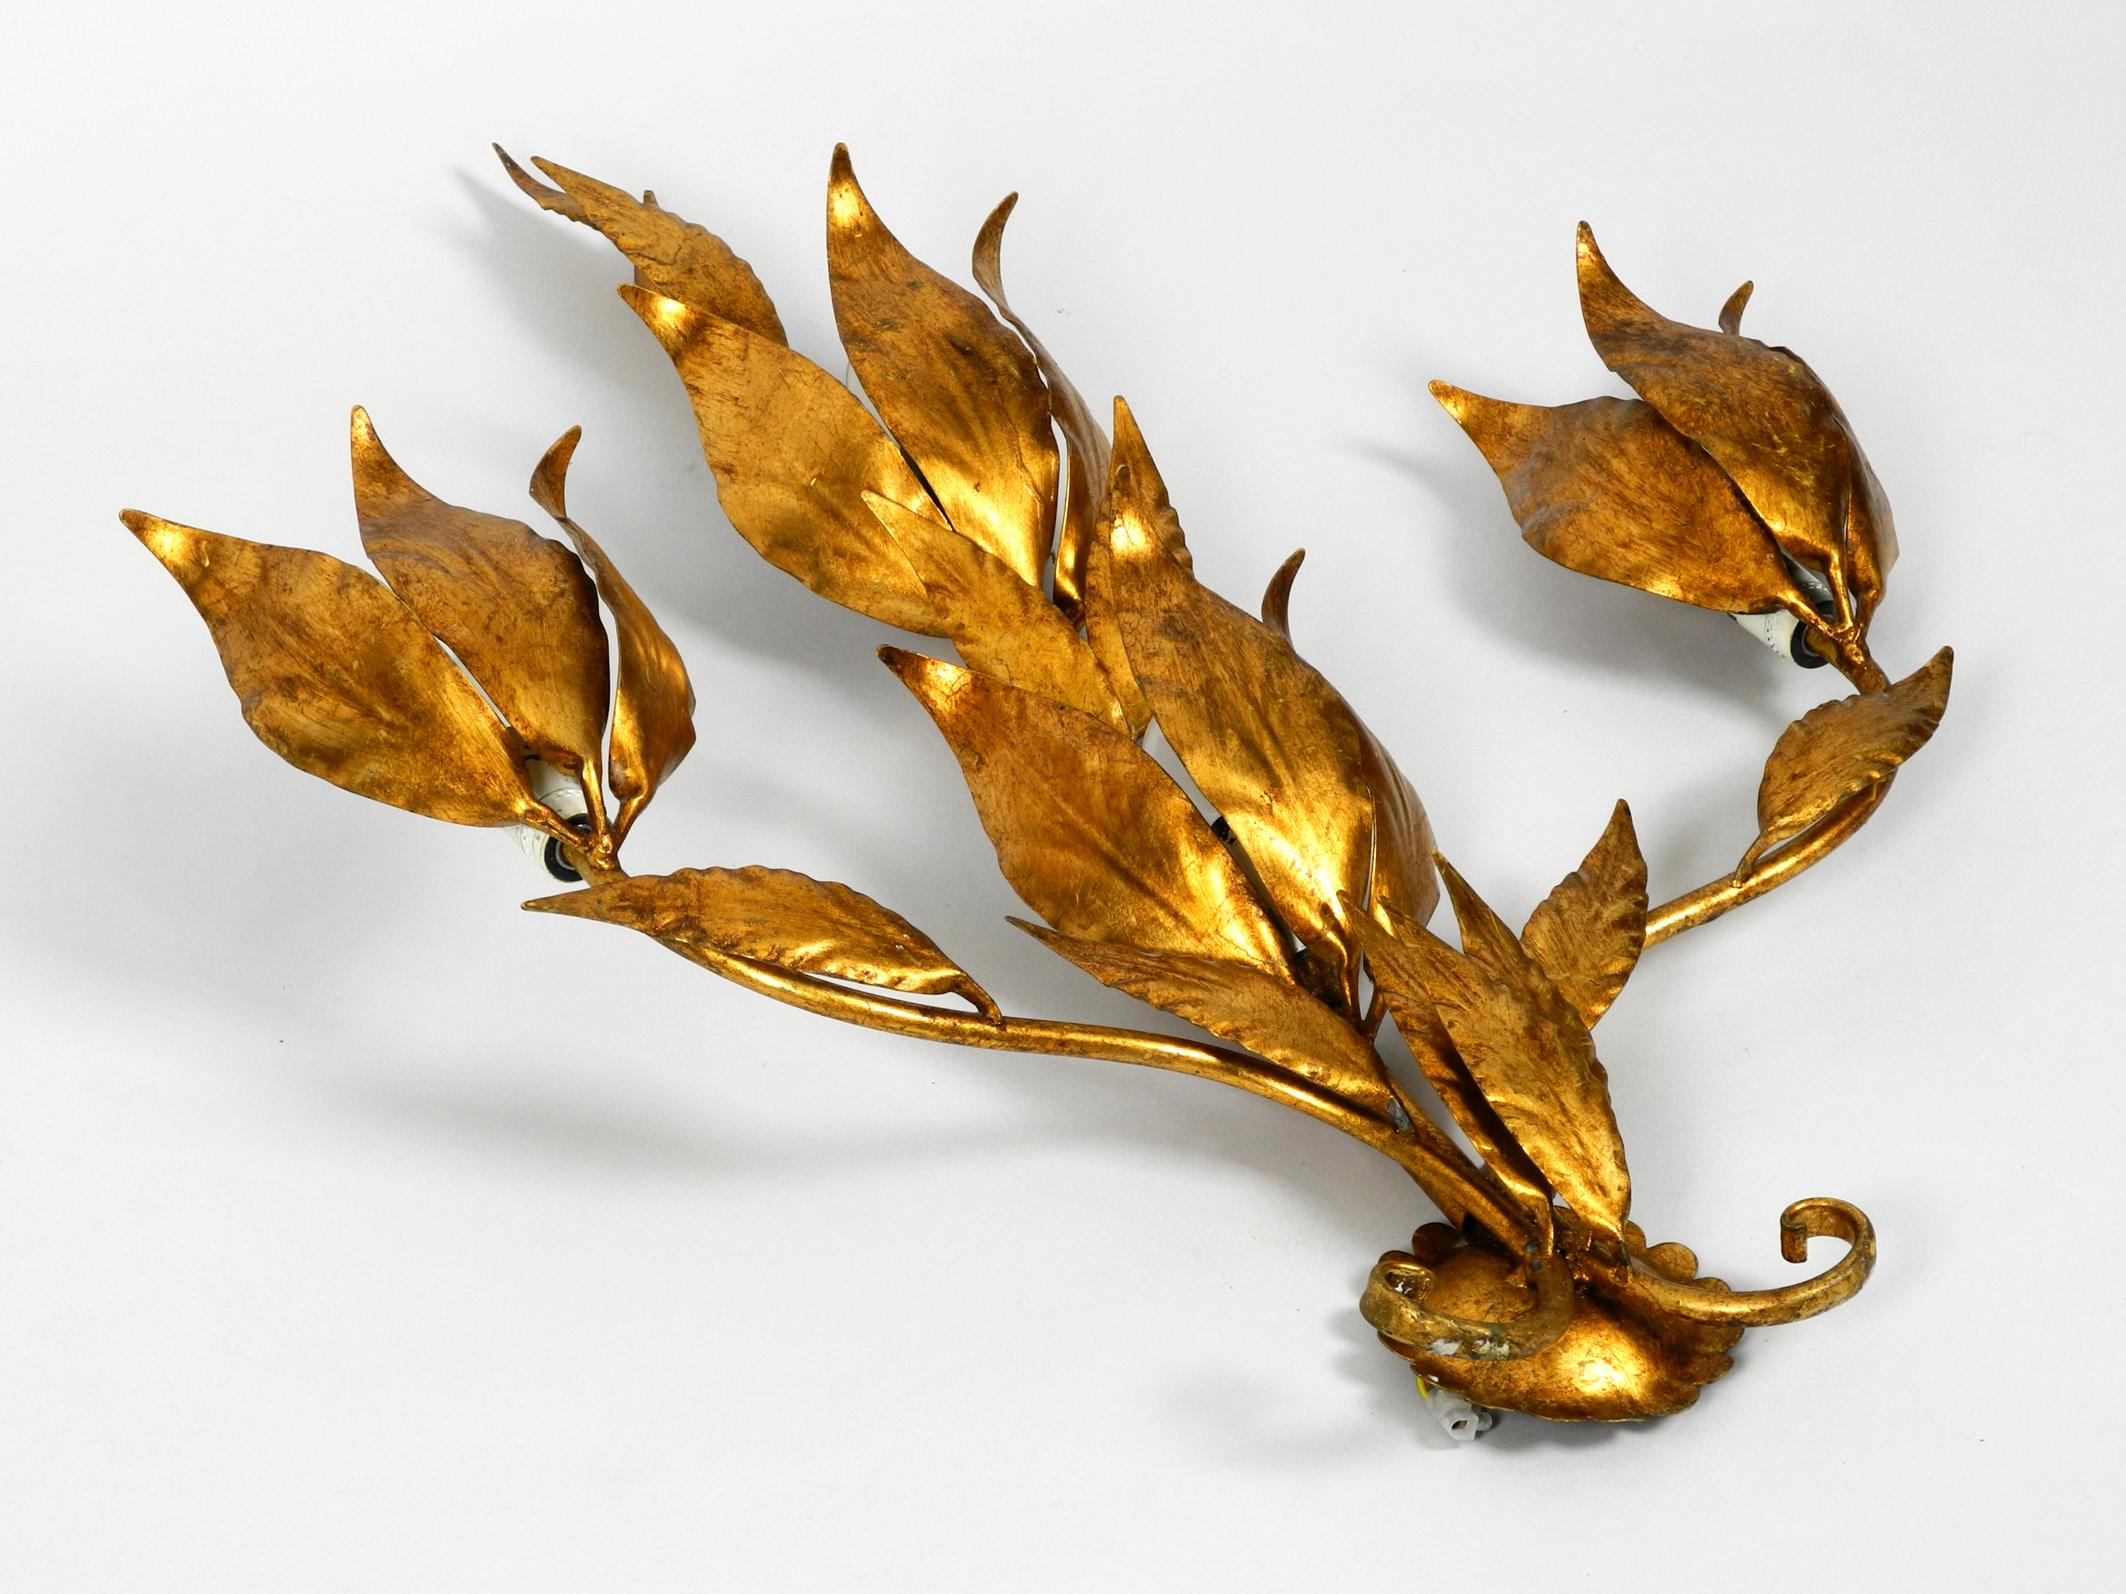 Rare 1970s large Florentine wall lamp with 4 sockets.
Beautiful design with lots of details. Most likely from an Italian production.
Many large leaves with curved stems. Very high quality workmanship.
Entire lamp is made of heavy gold-plated